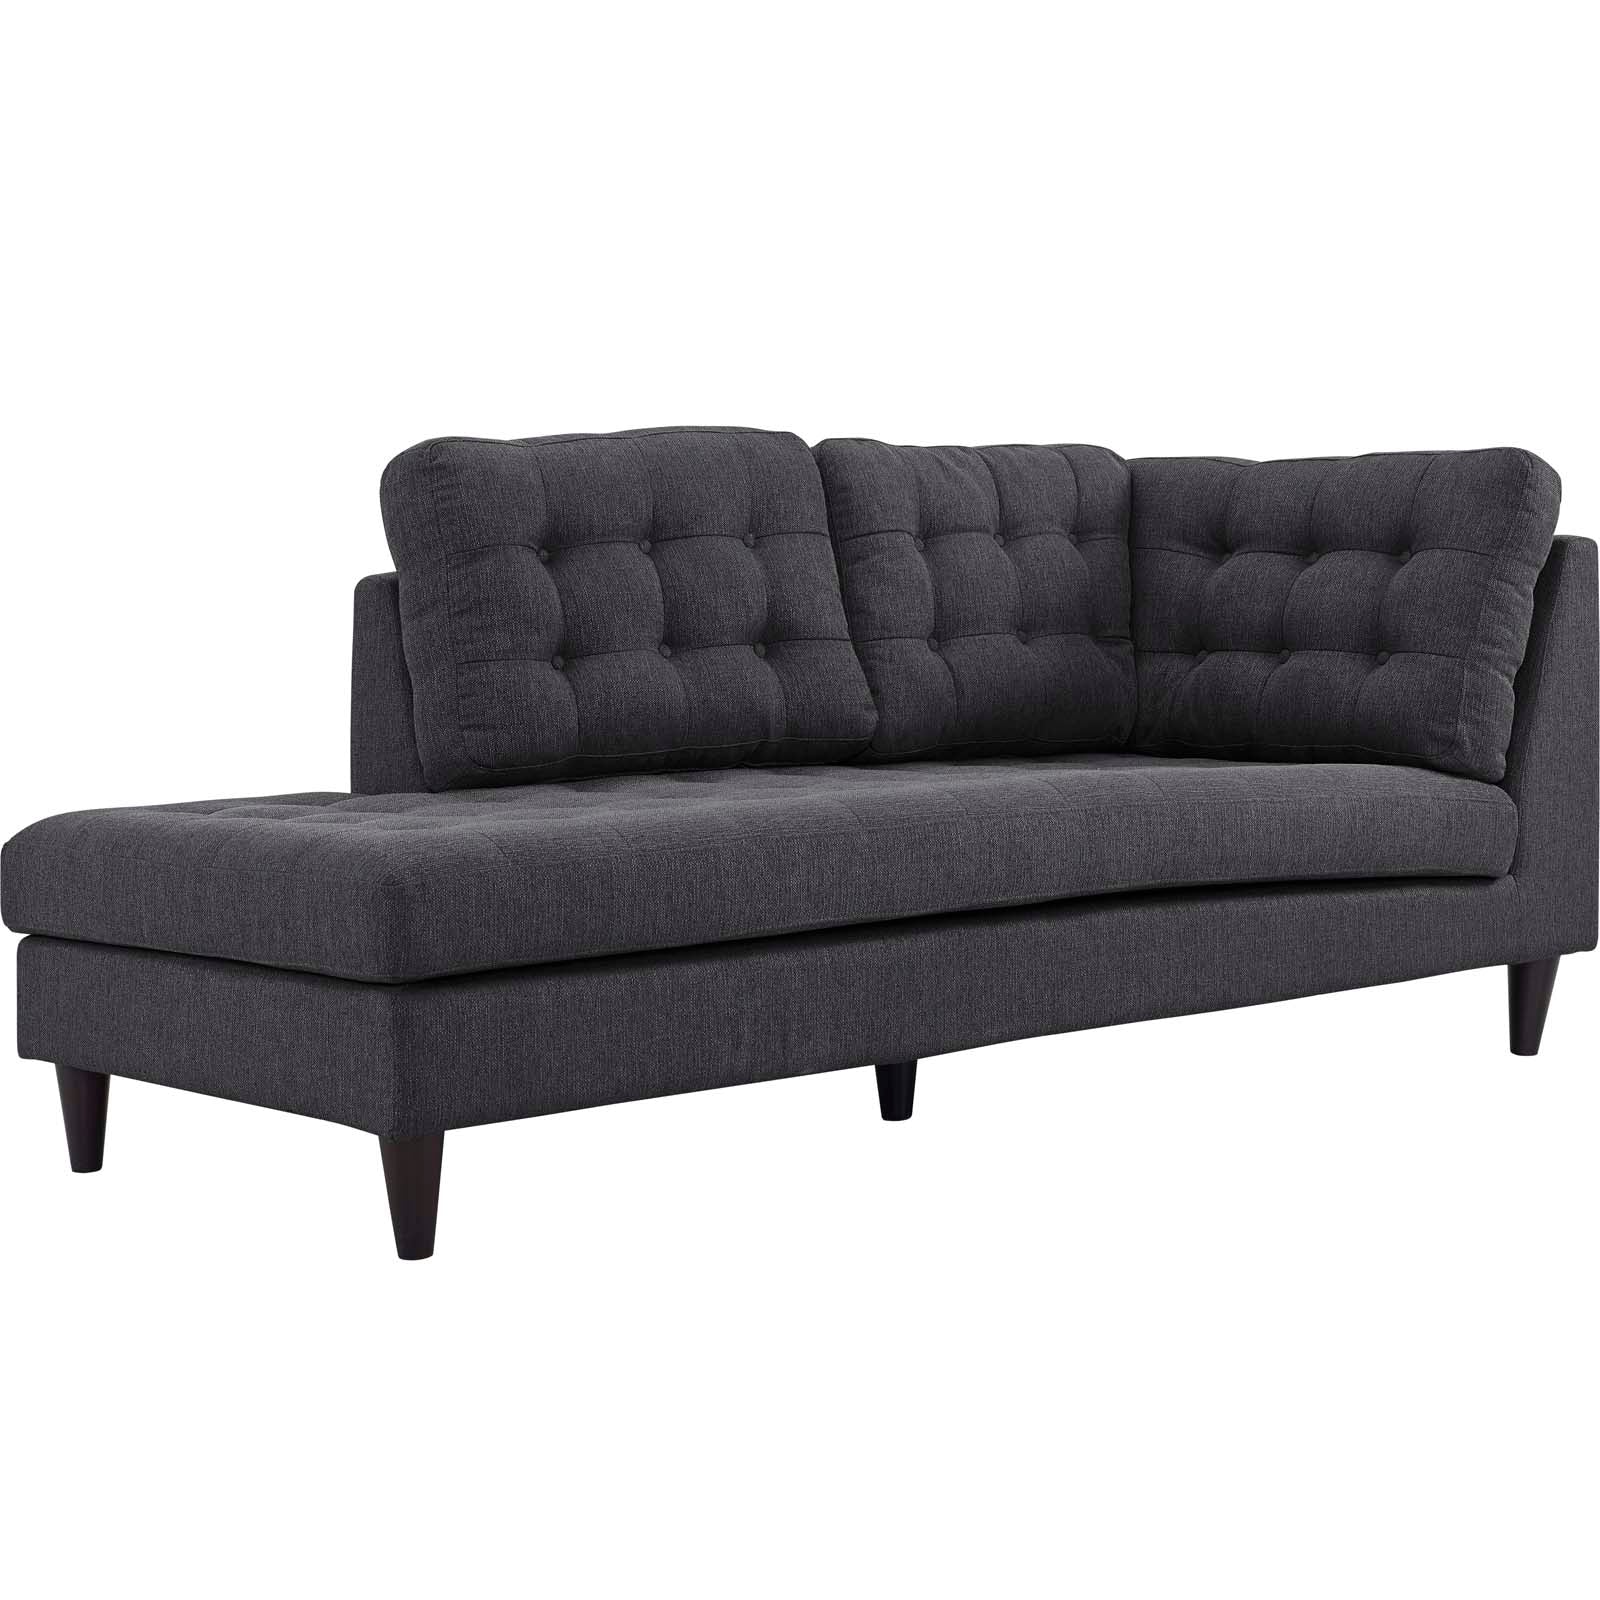 Modway Sectional Sofas - Empress 2 Piece Upholstered Fabric Left Facing Bumper Sectional Gray